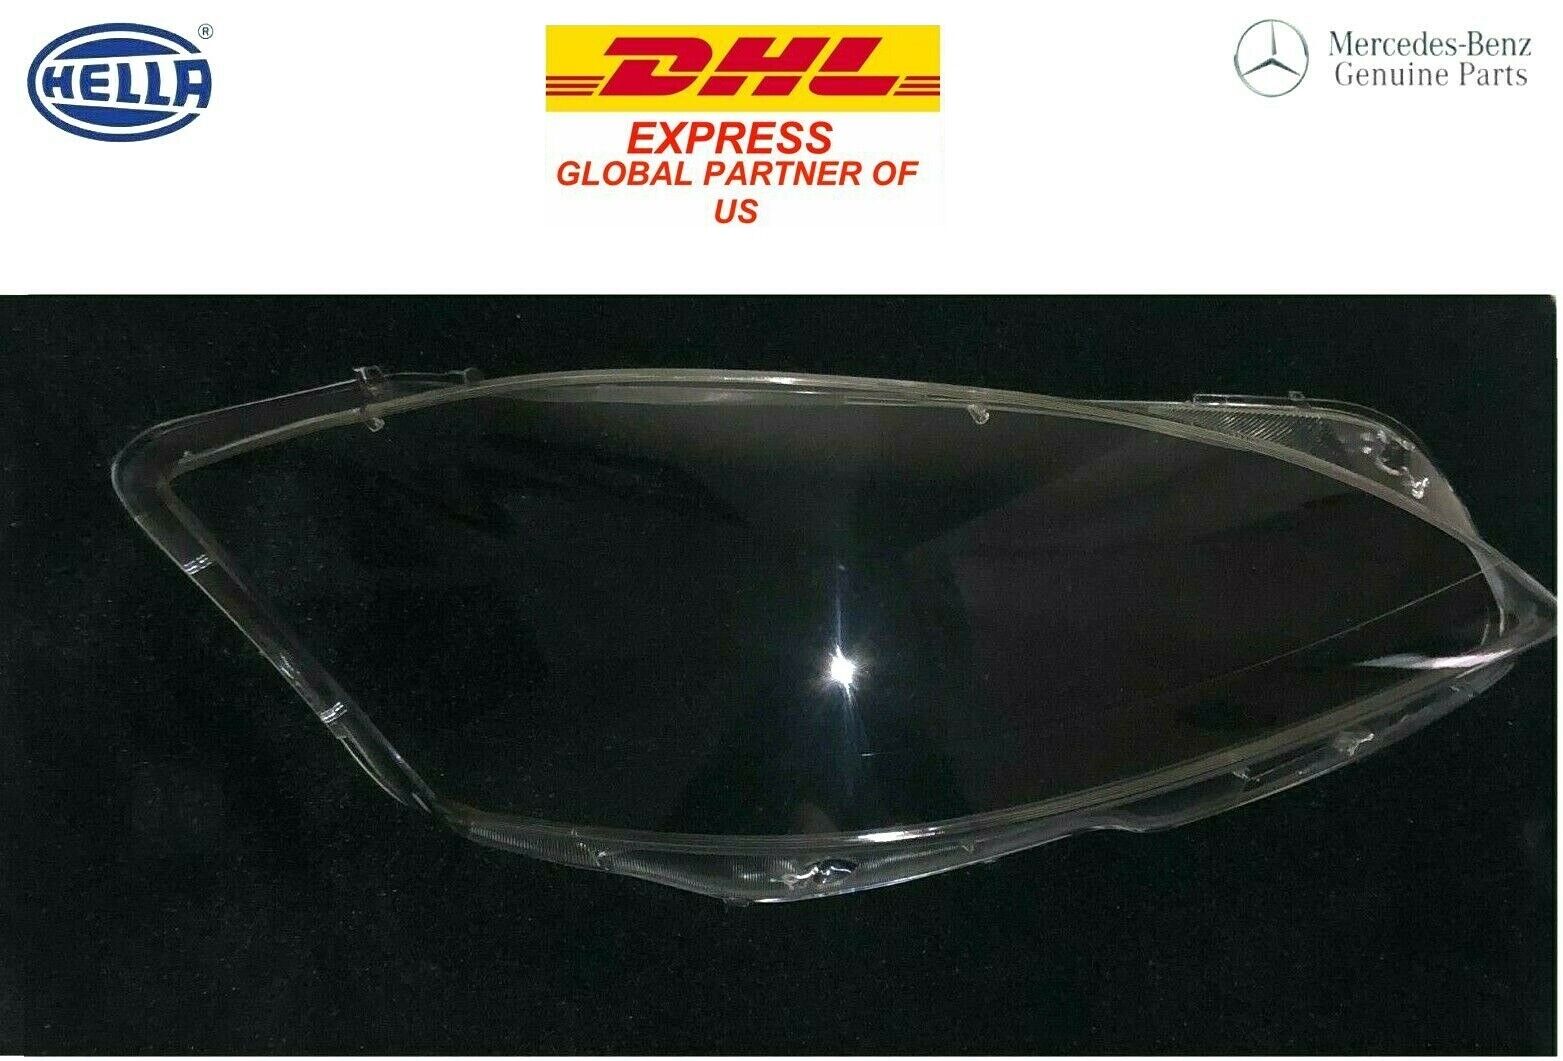 Mercedes W221 S350 S500 S550 S600 S63 S65 AMG Headlight Lens Cover Right OEM NEW